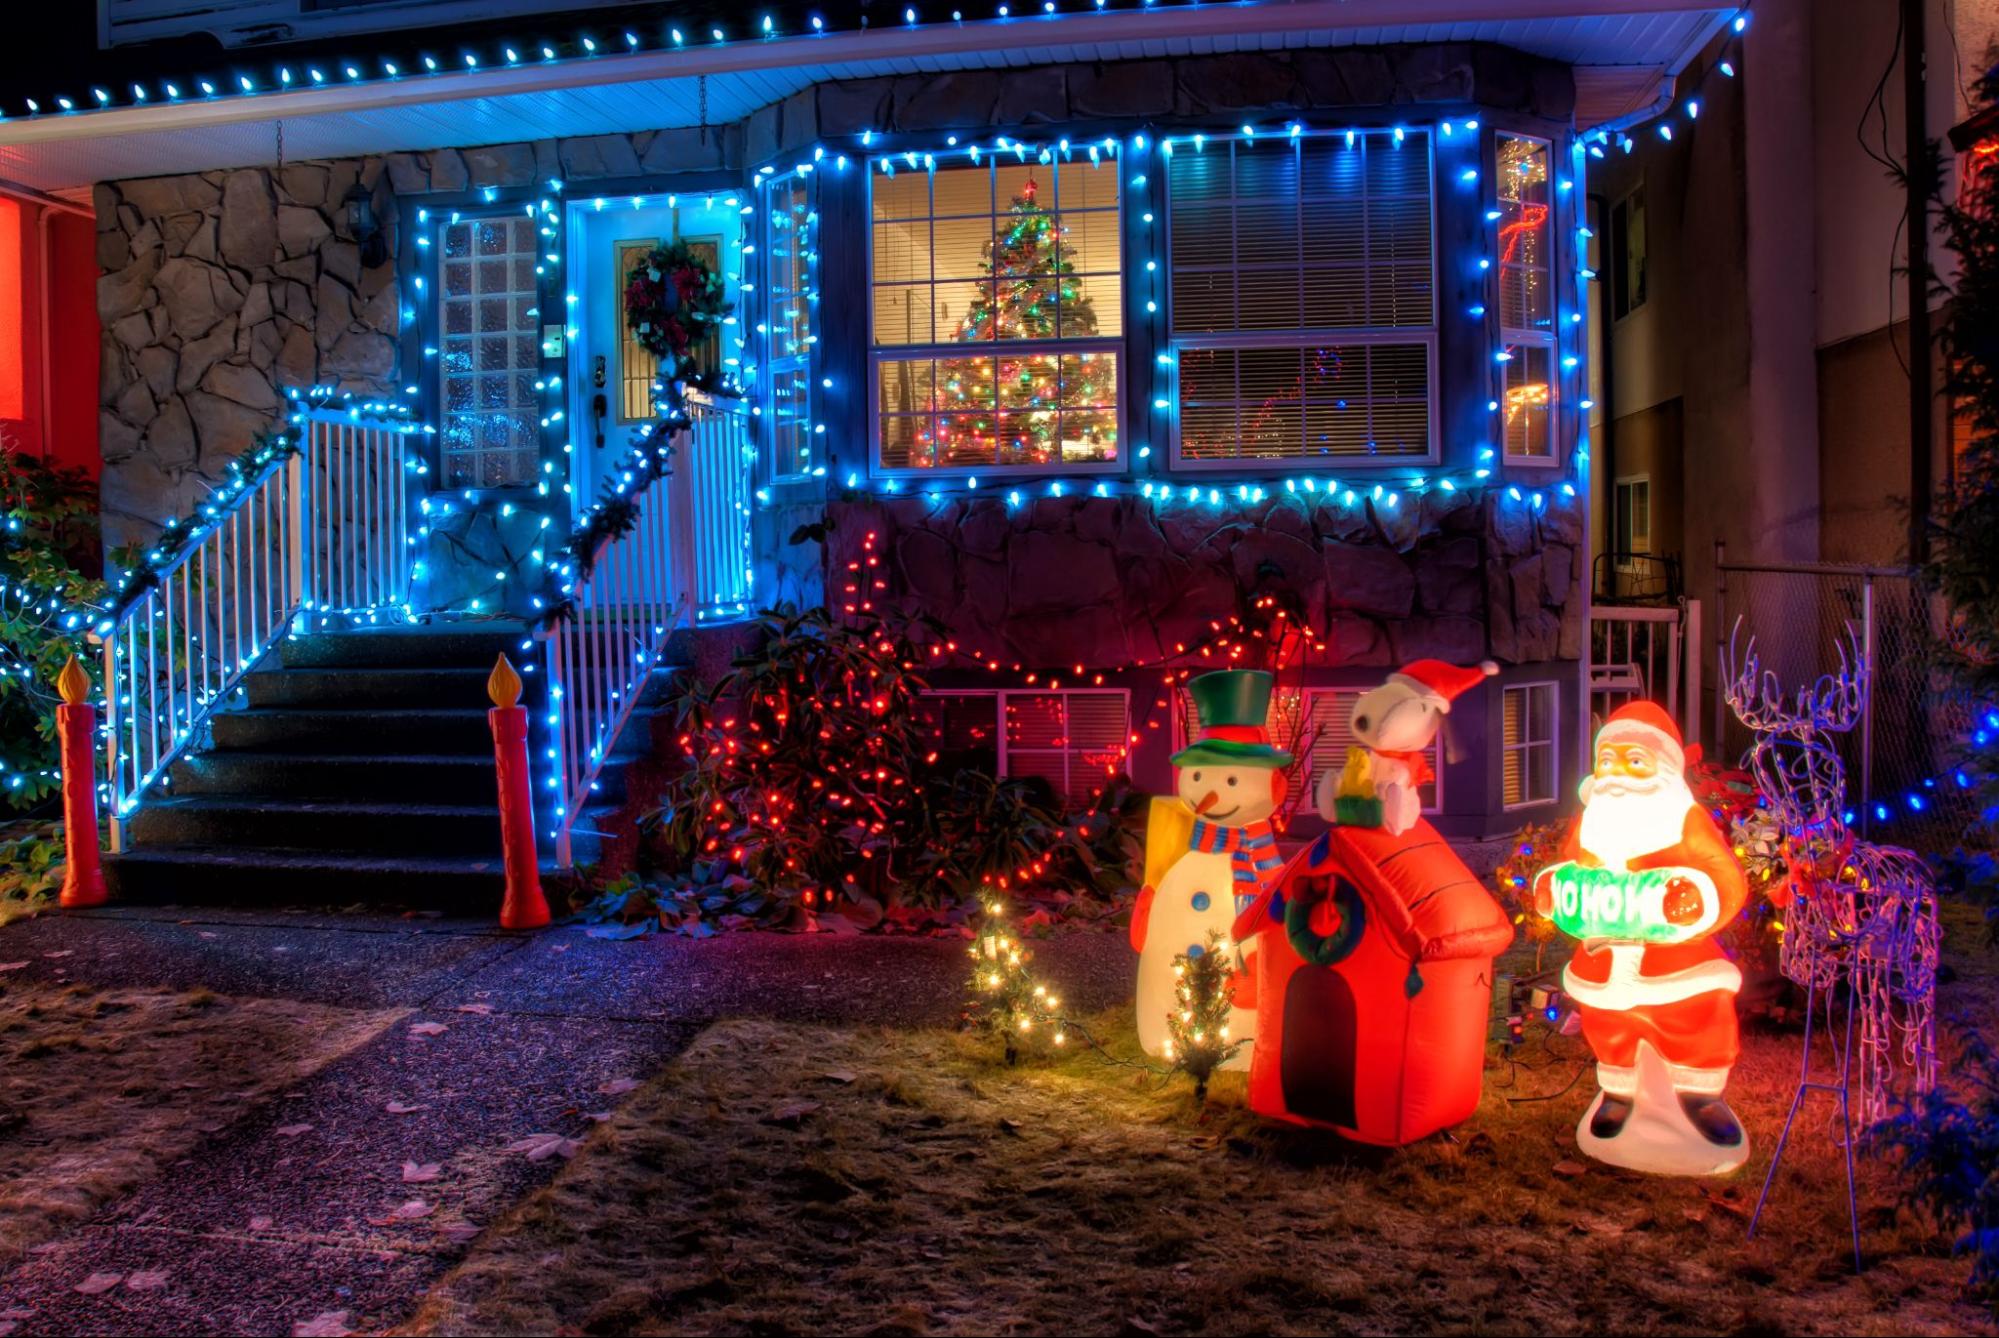 The image depicts a house adorned with vibrant Christmas lights, creating a festive ambiance